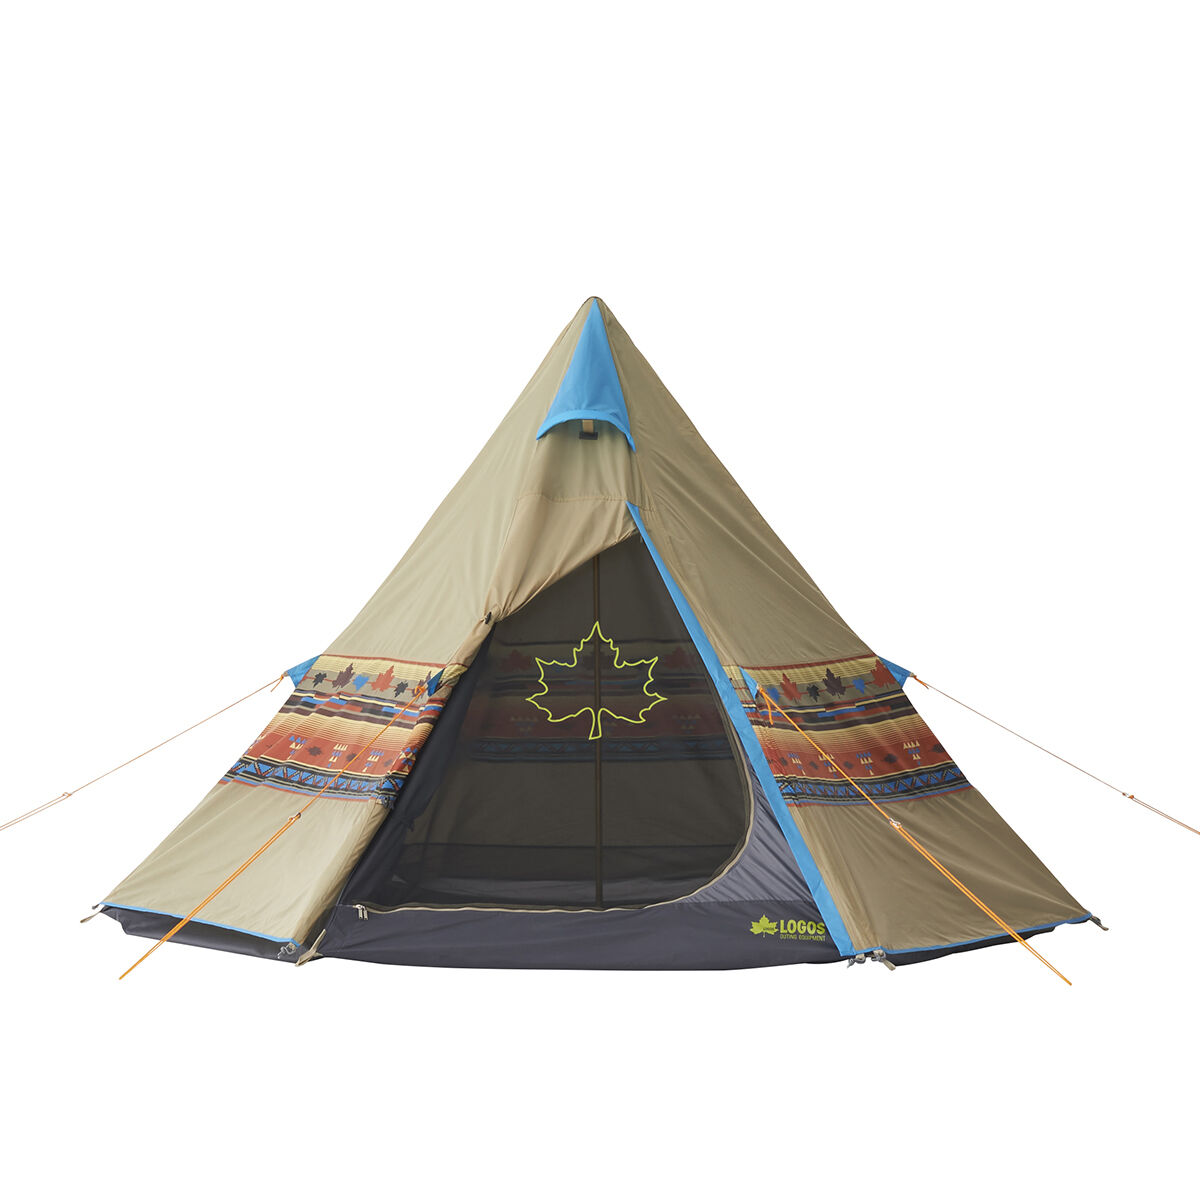 Shop Shop All Tents | LOGOS Official Global Online Store